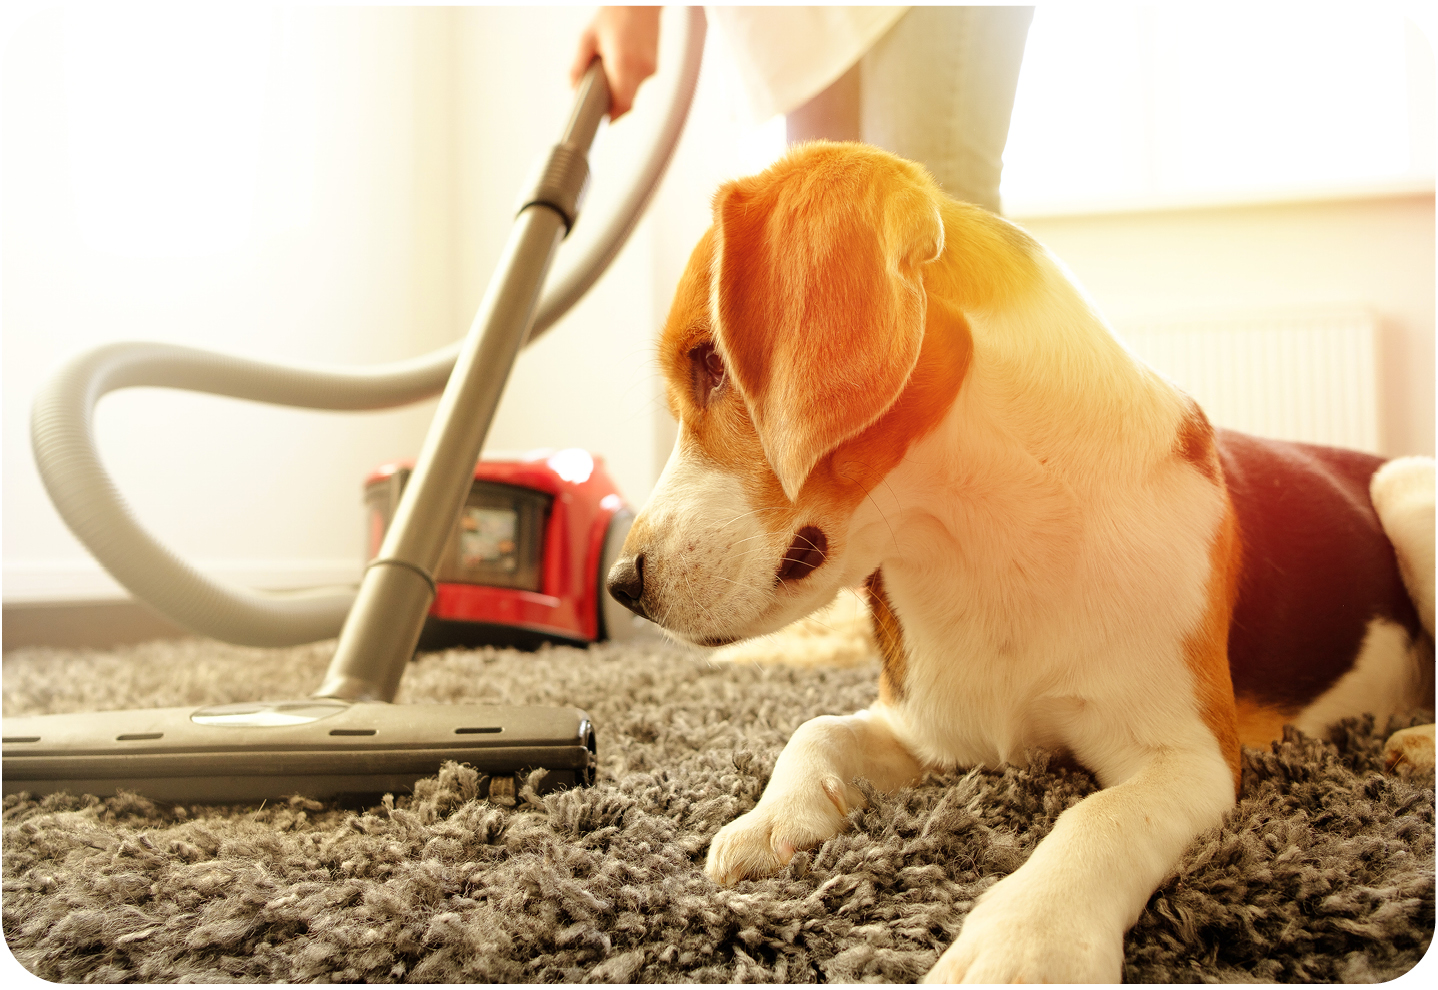 A pet dog sitting on a carpet being vacuumed